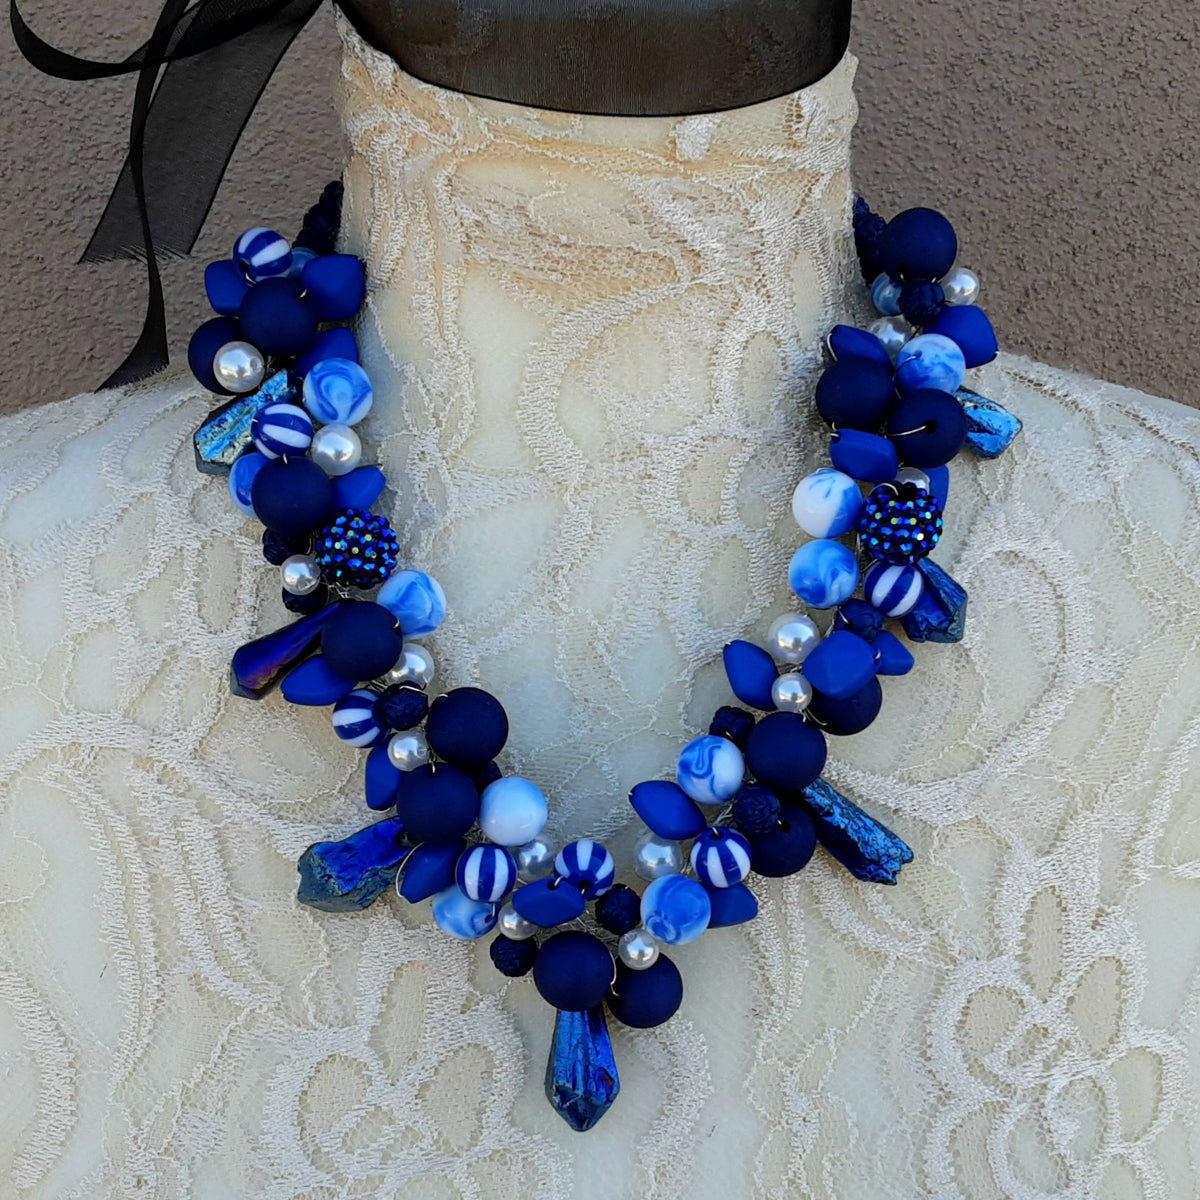 Chunky Cluster Statement Necklace - Colorful Blue & White Collar - Unique Twisted Wire Gift for Her